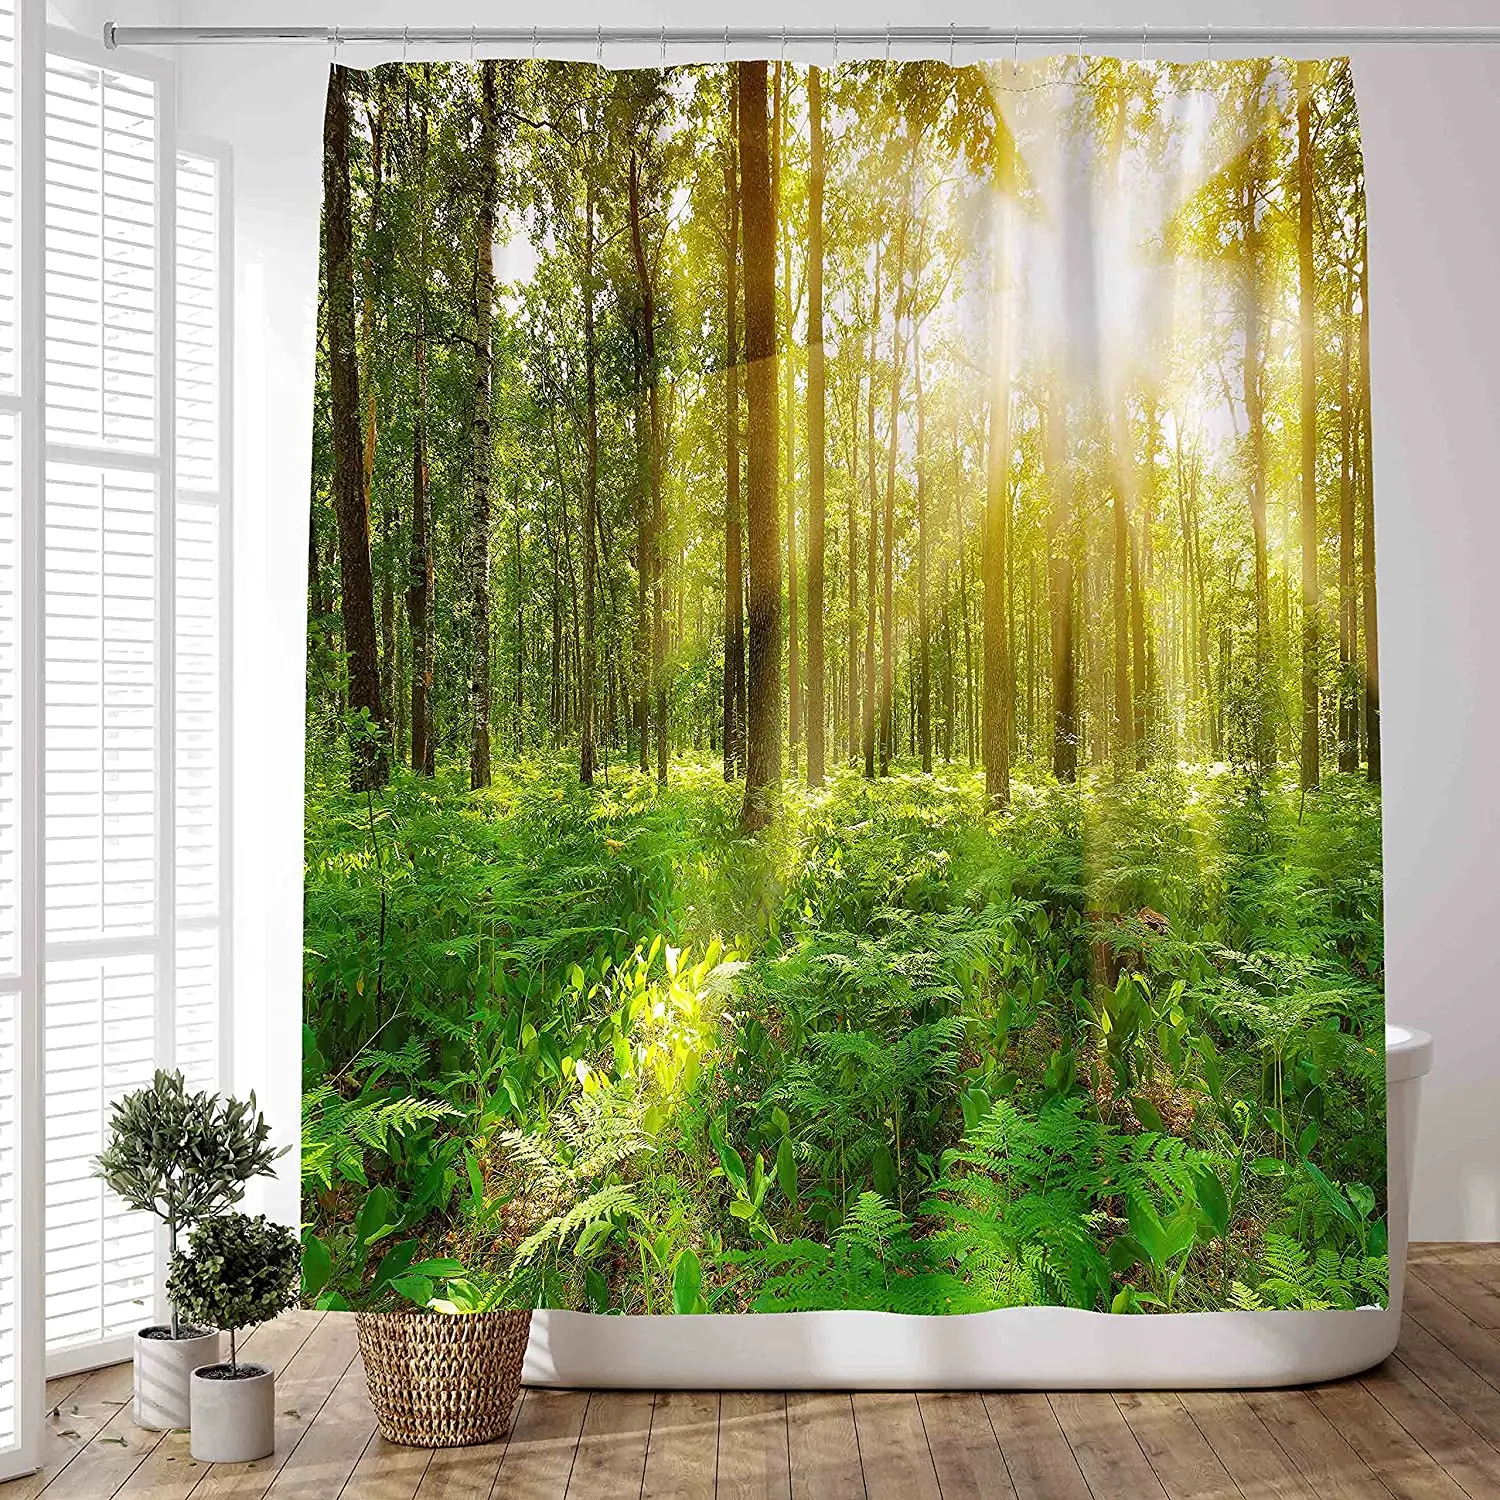 

Spring Sunlight Trees Shower Curtains Nature Forest Green leaves For Bathroom Home Decor Landscape Bath Curtain Sets With Hooks